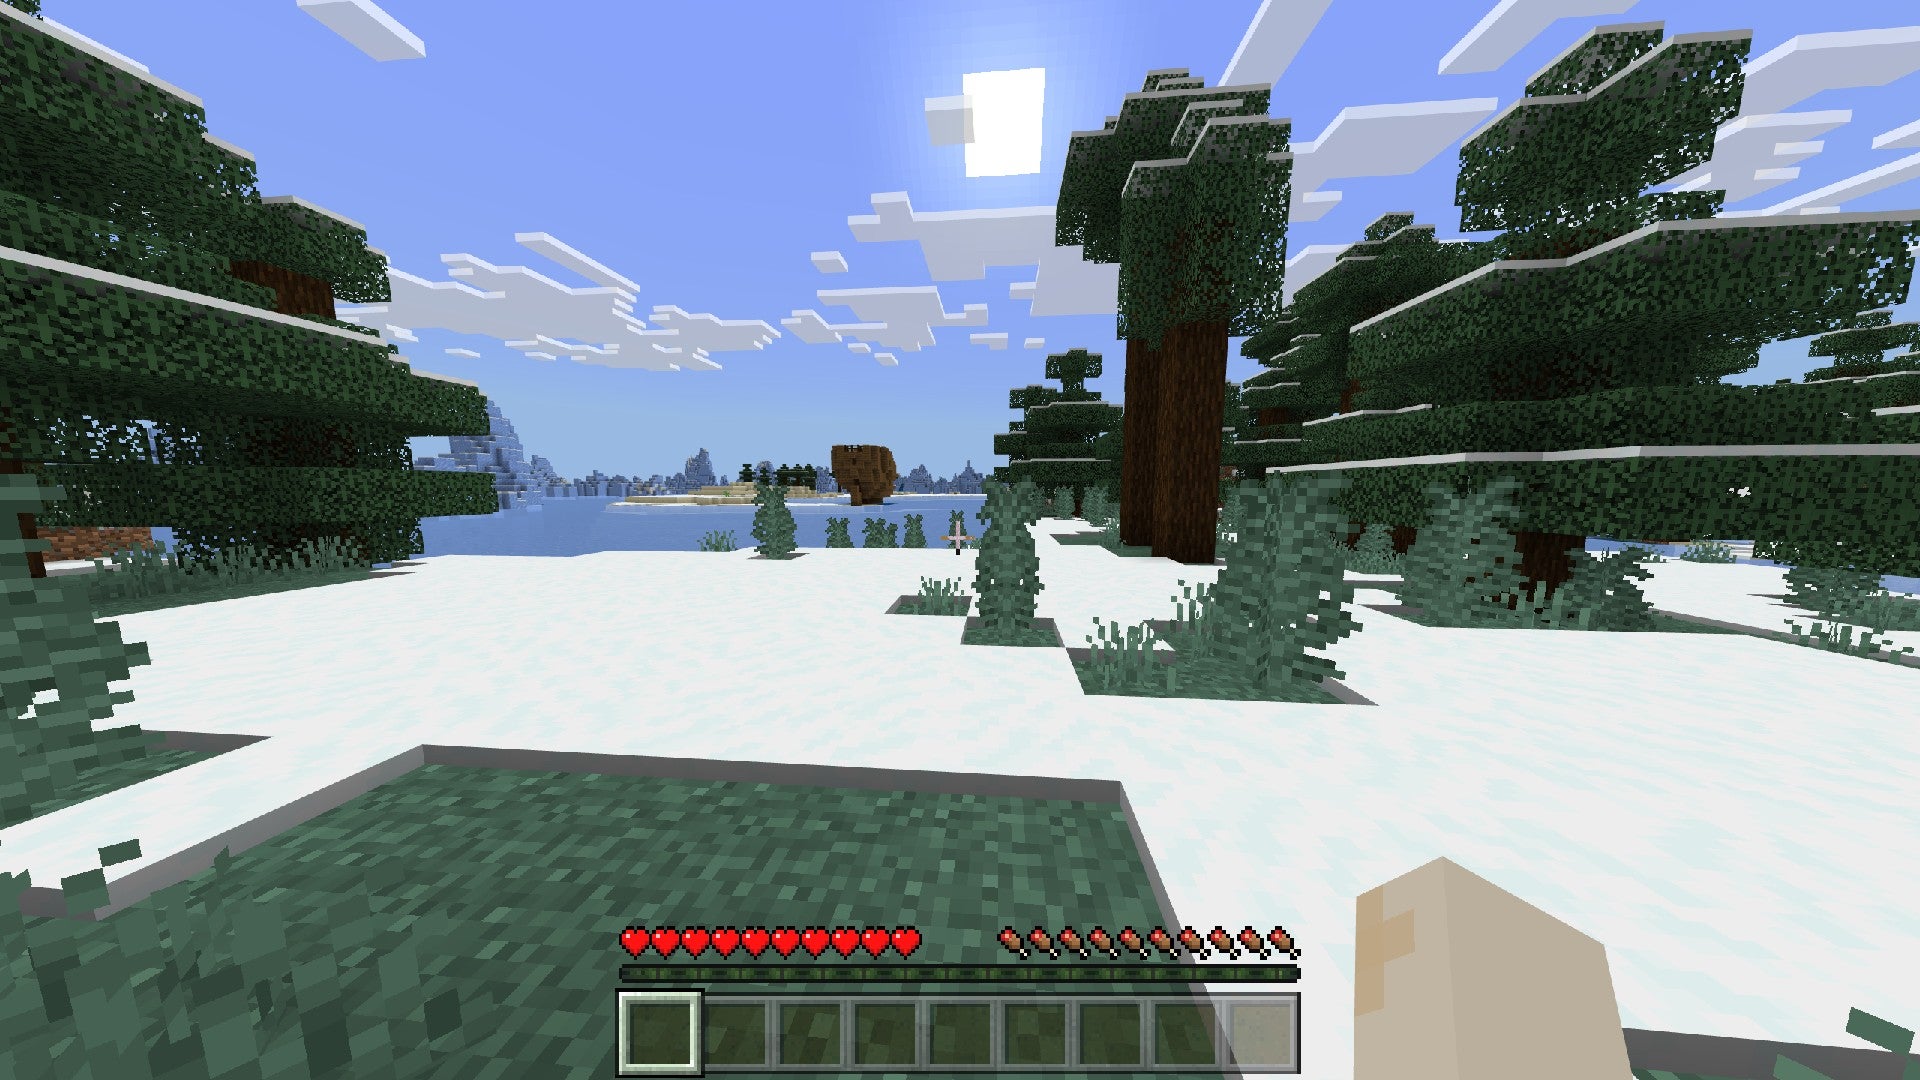 Minecraft screenshot showing a player in a snowy biome, with a wooden structure in the lake ahead.